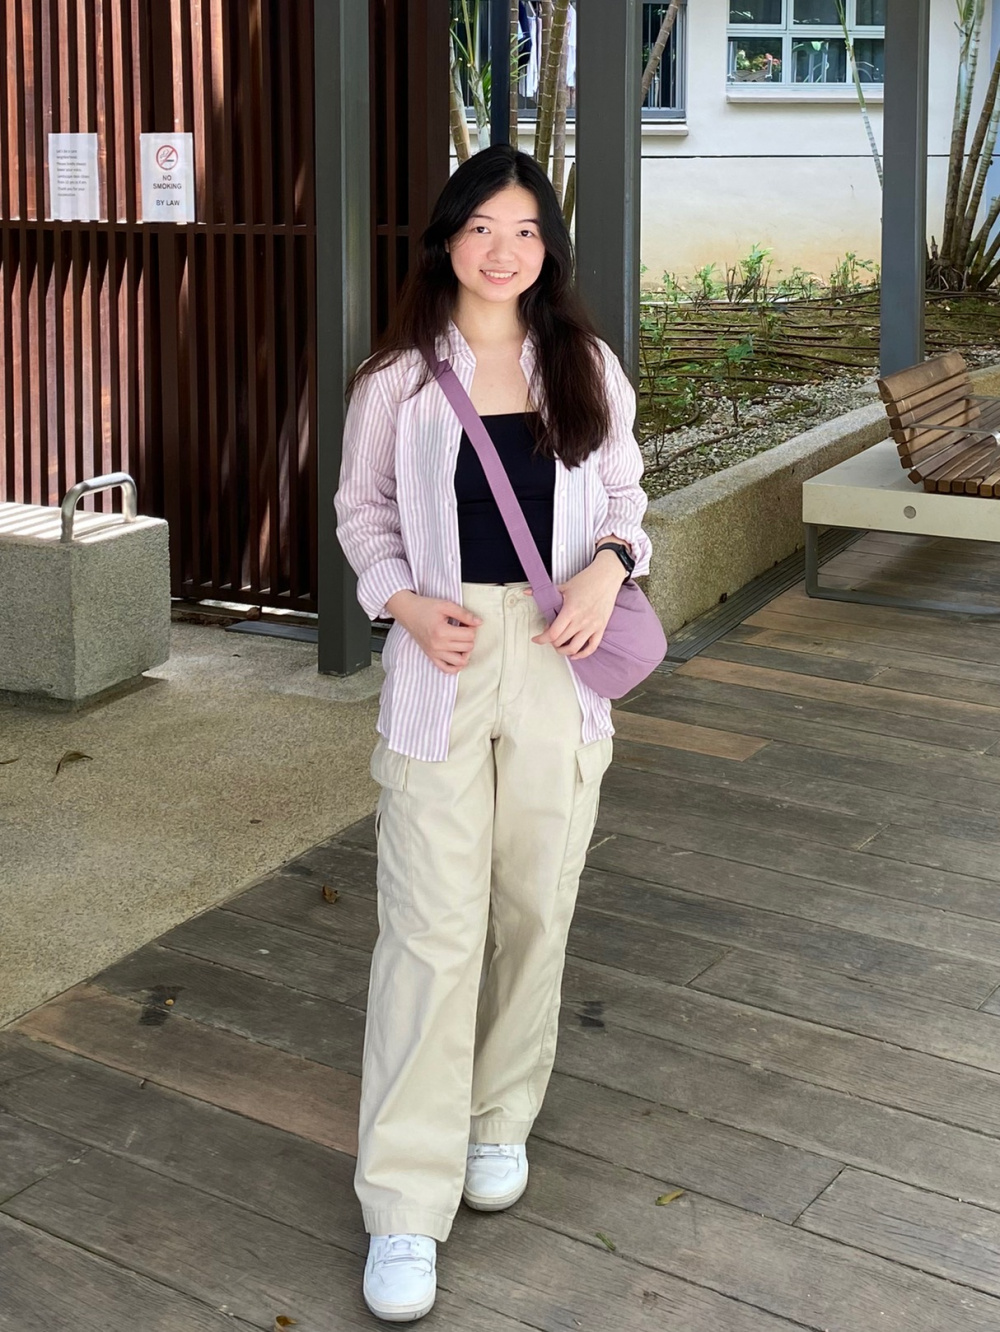 Check styling ideas for「Wide Straight Cargo Pants」